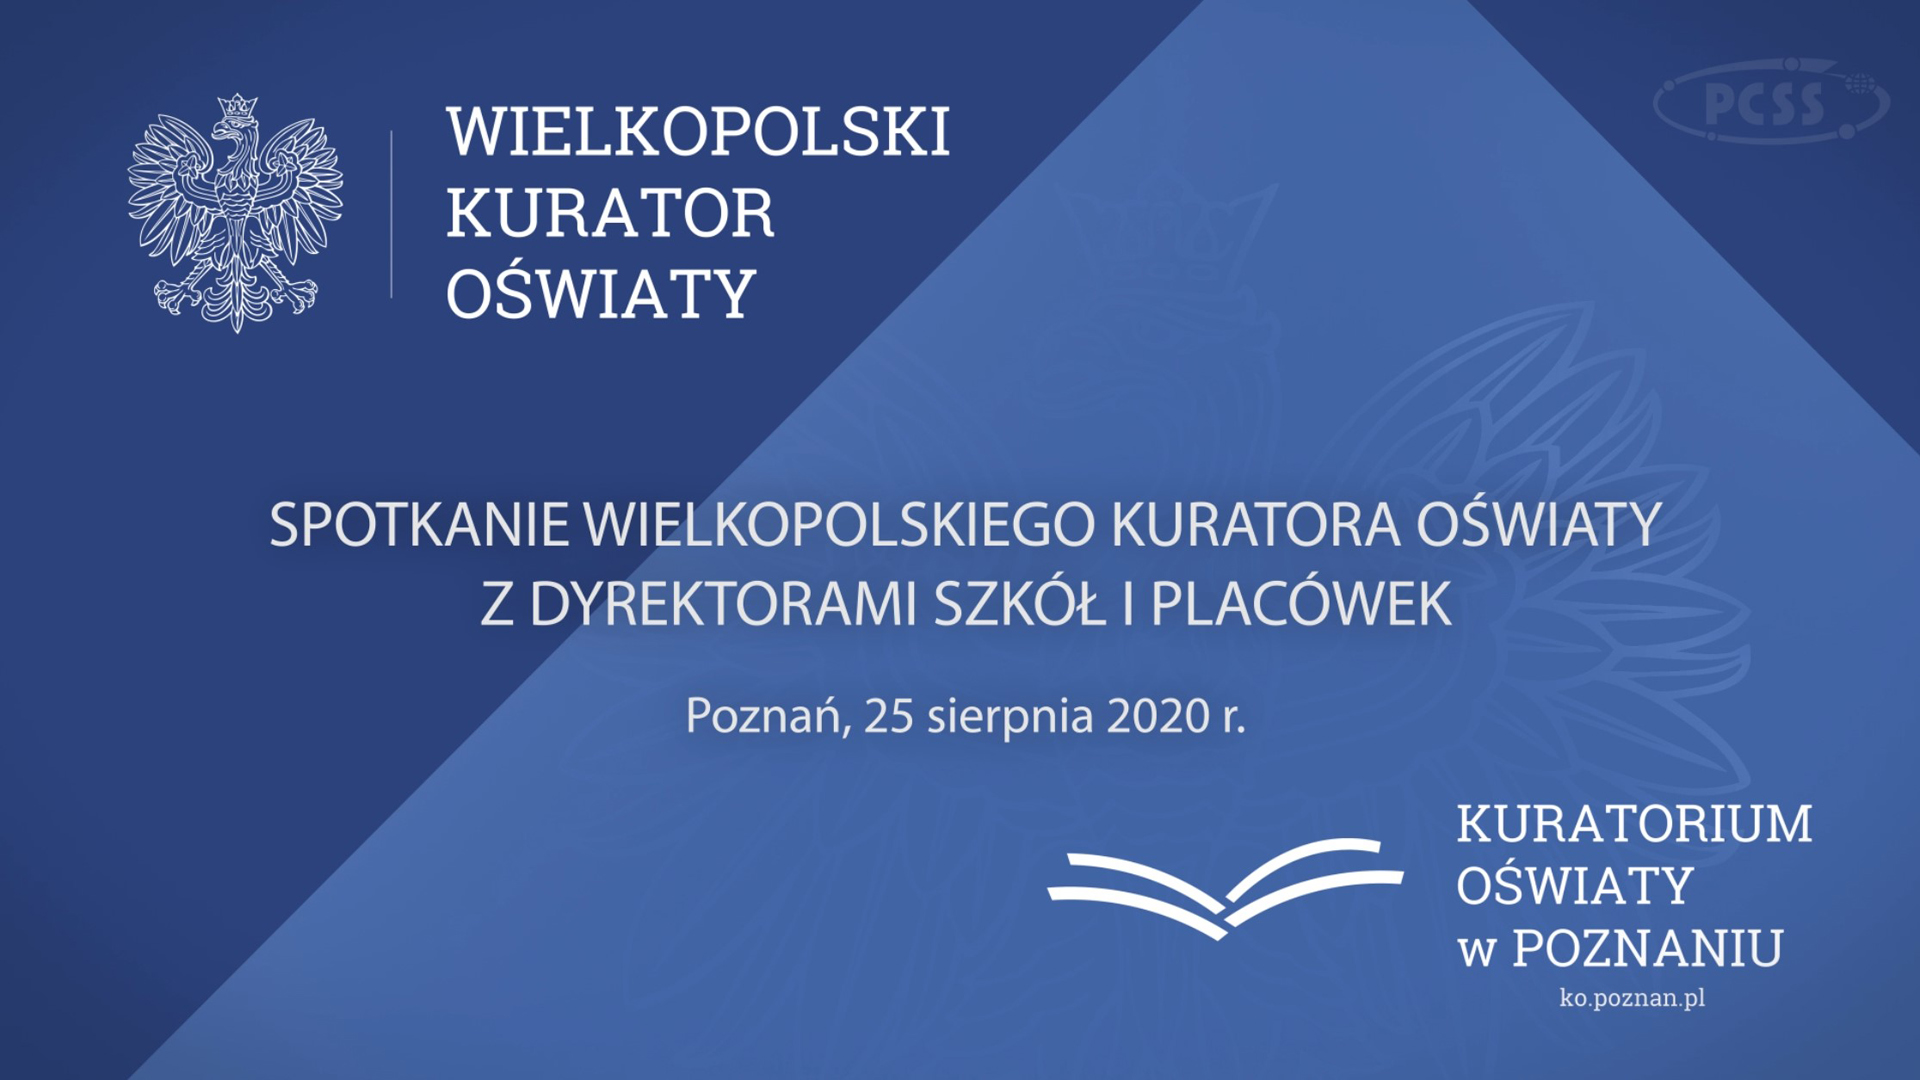 The next webinar of the Board of Education in Poznan with school principals